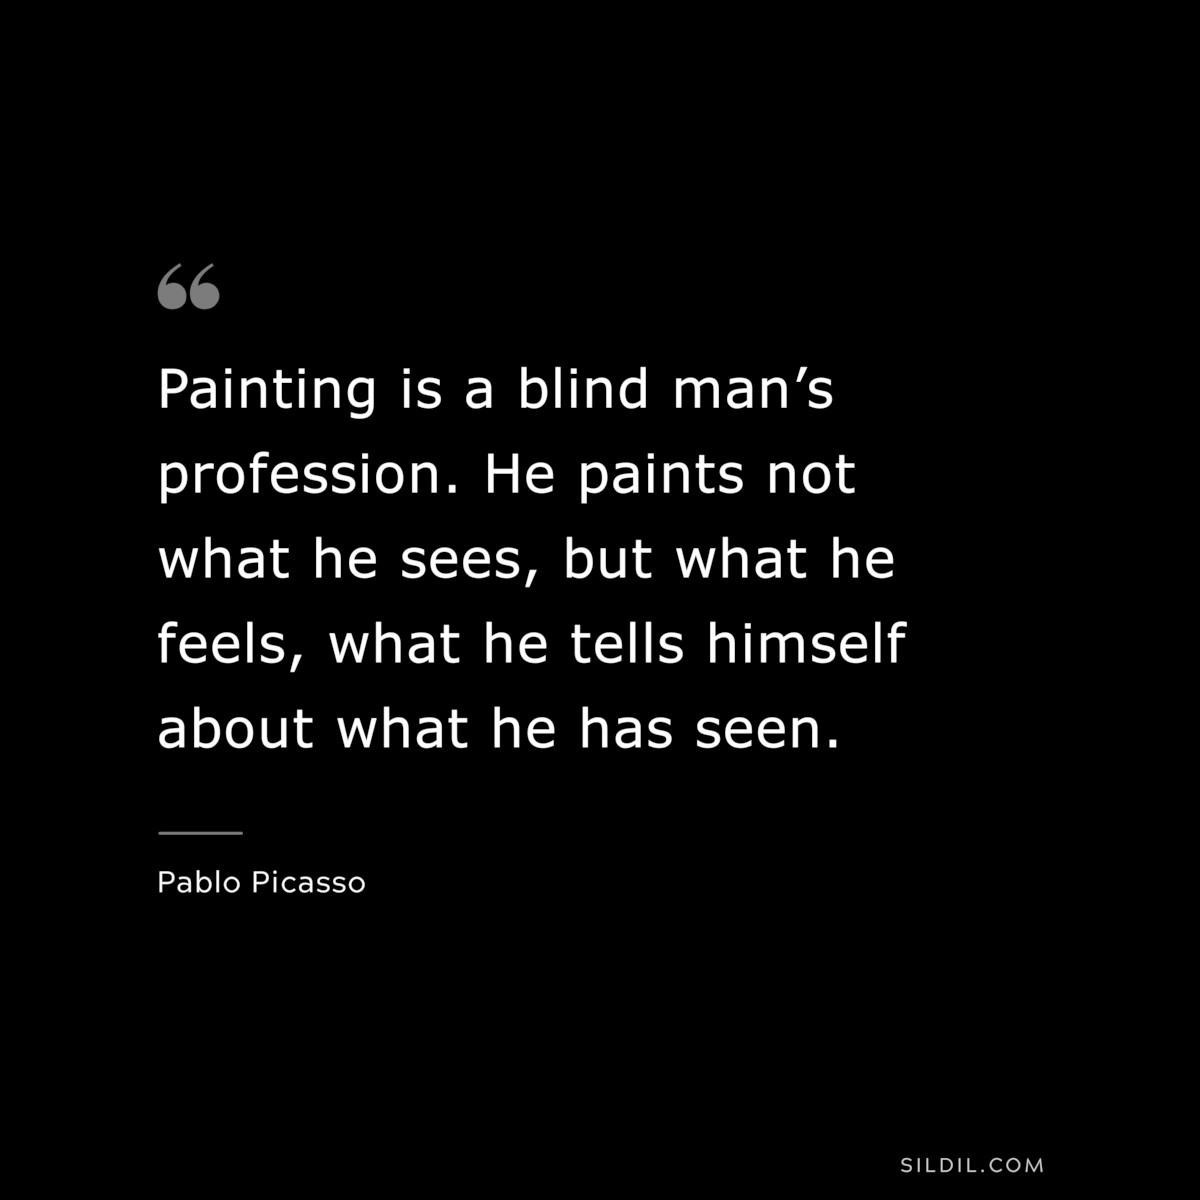 Painting is a blind man’s profession. He paints not what he sees, but what he feels, what he tells himself about what he has seen. ― Pablo Picasso